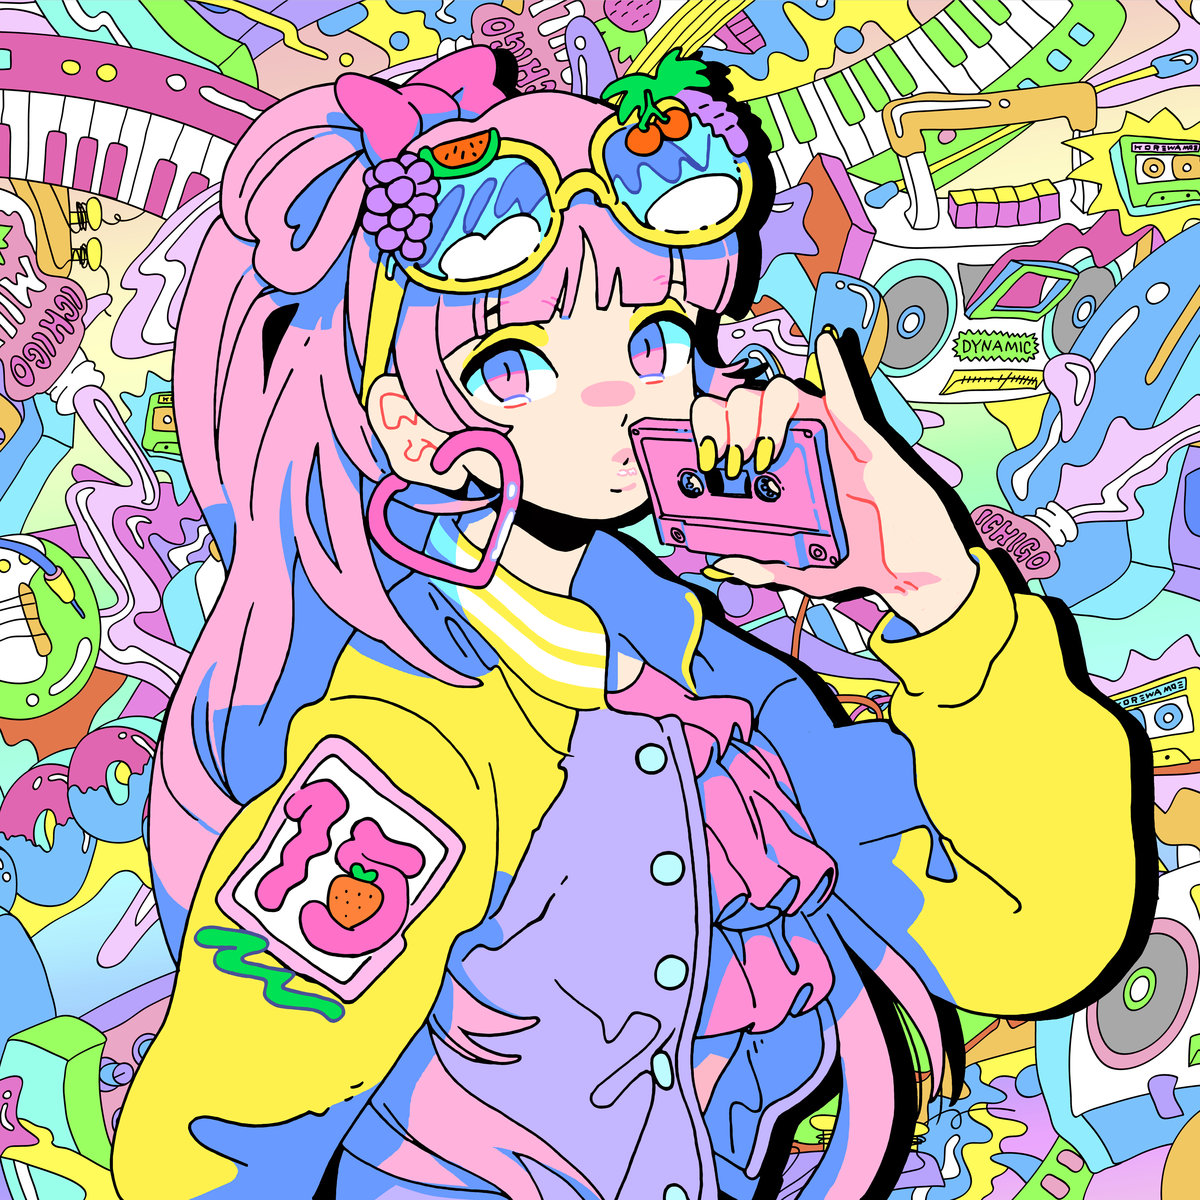 The cover art of Moe Shop